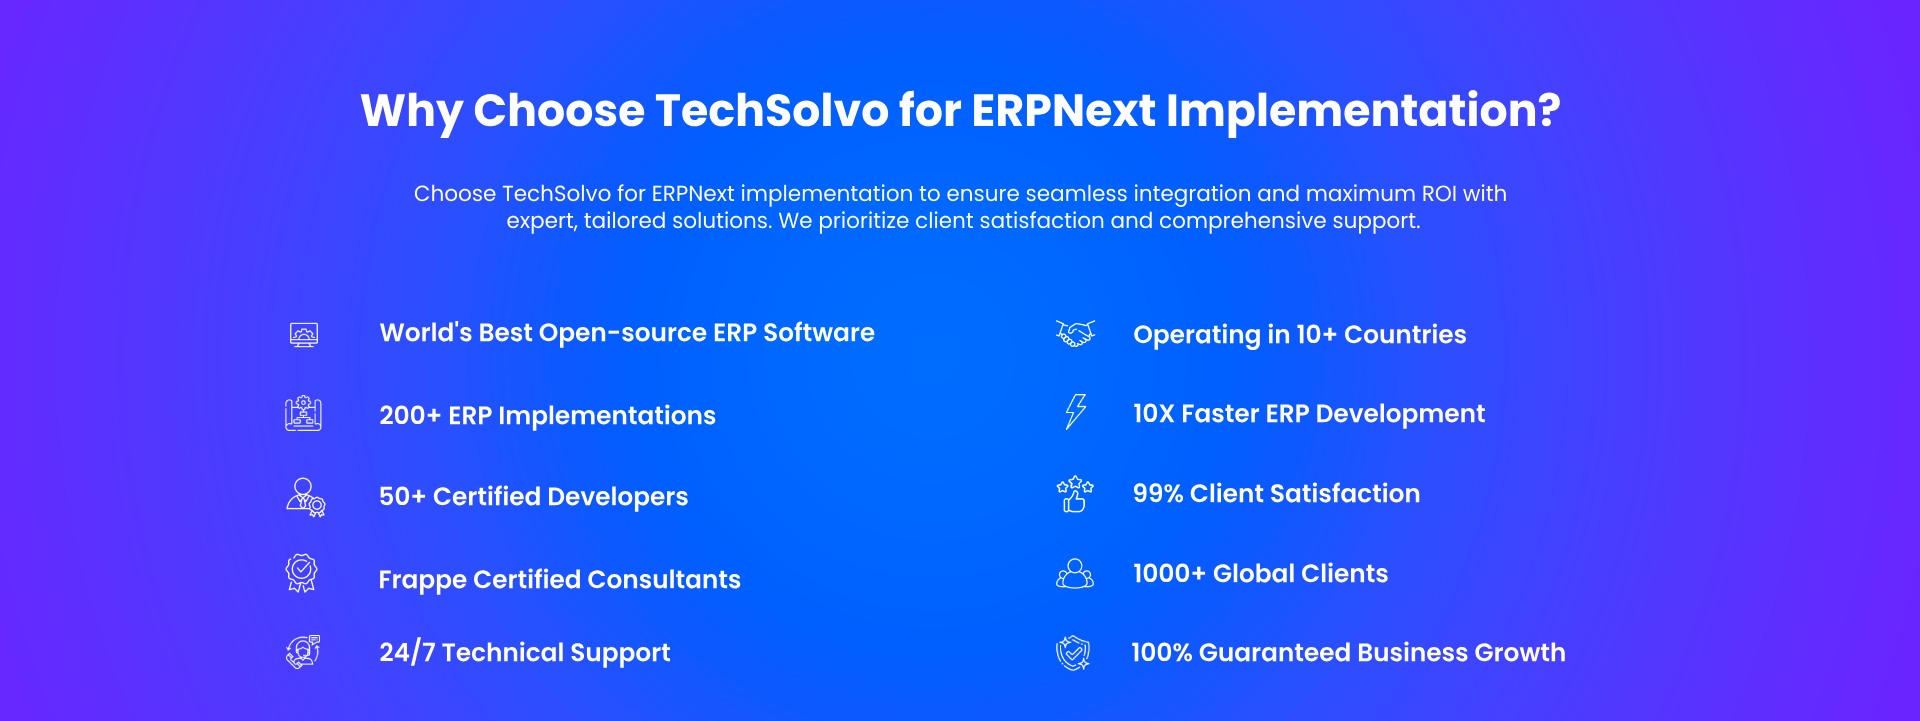 Why choose techsolvo for erpnext implementation